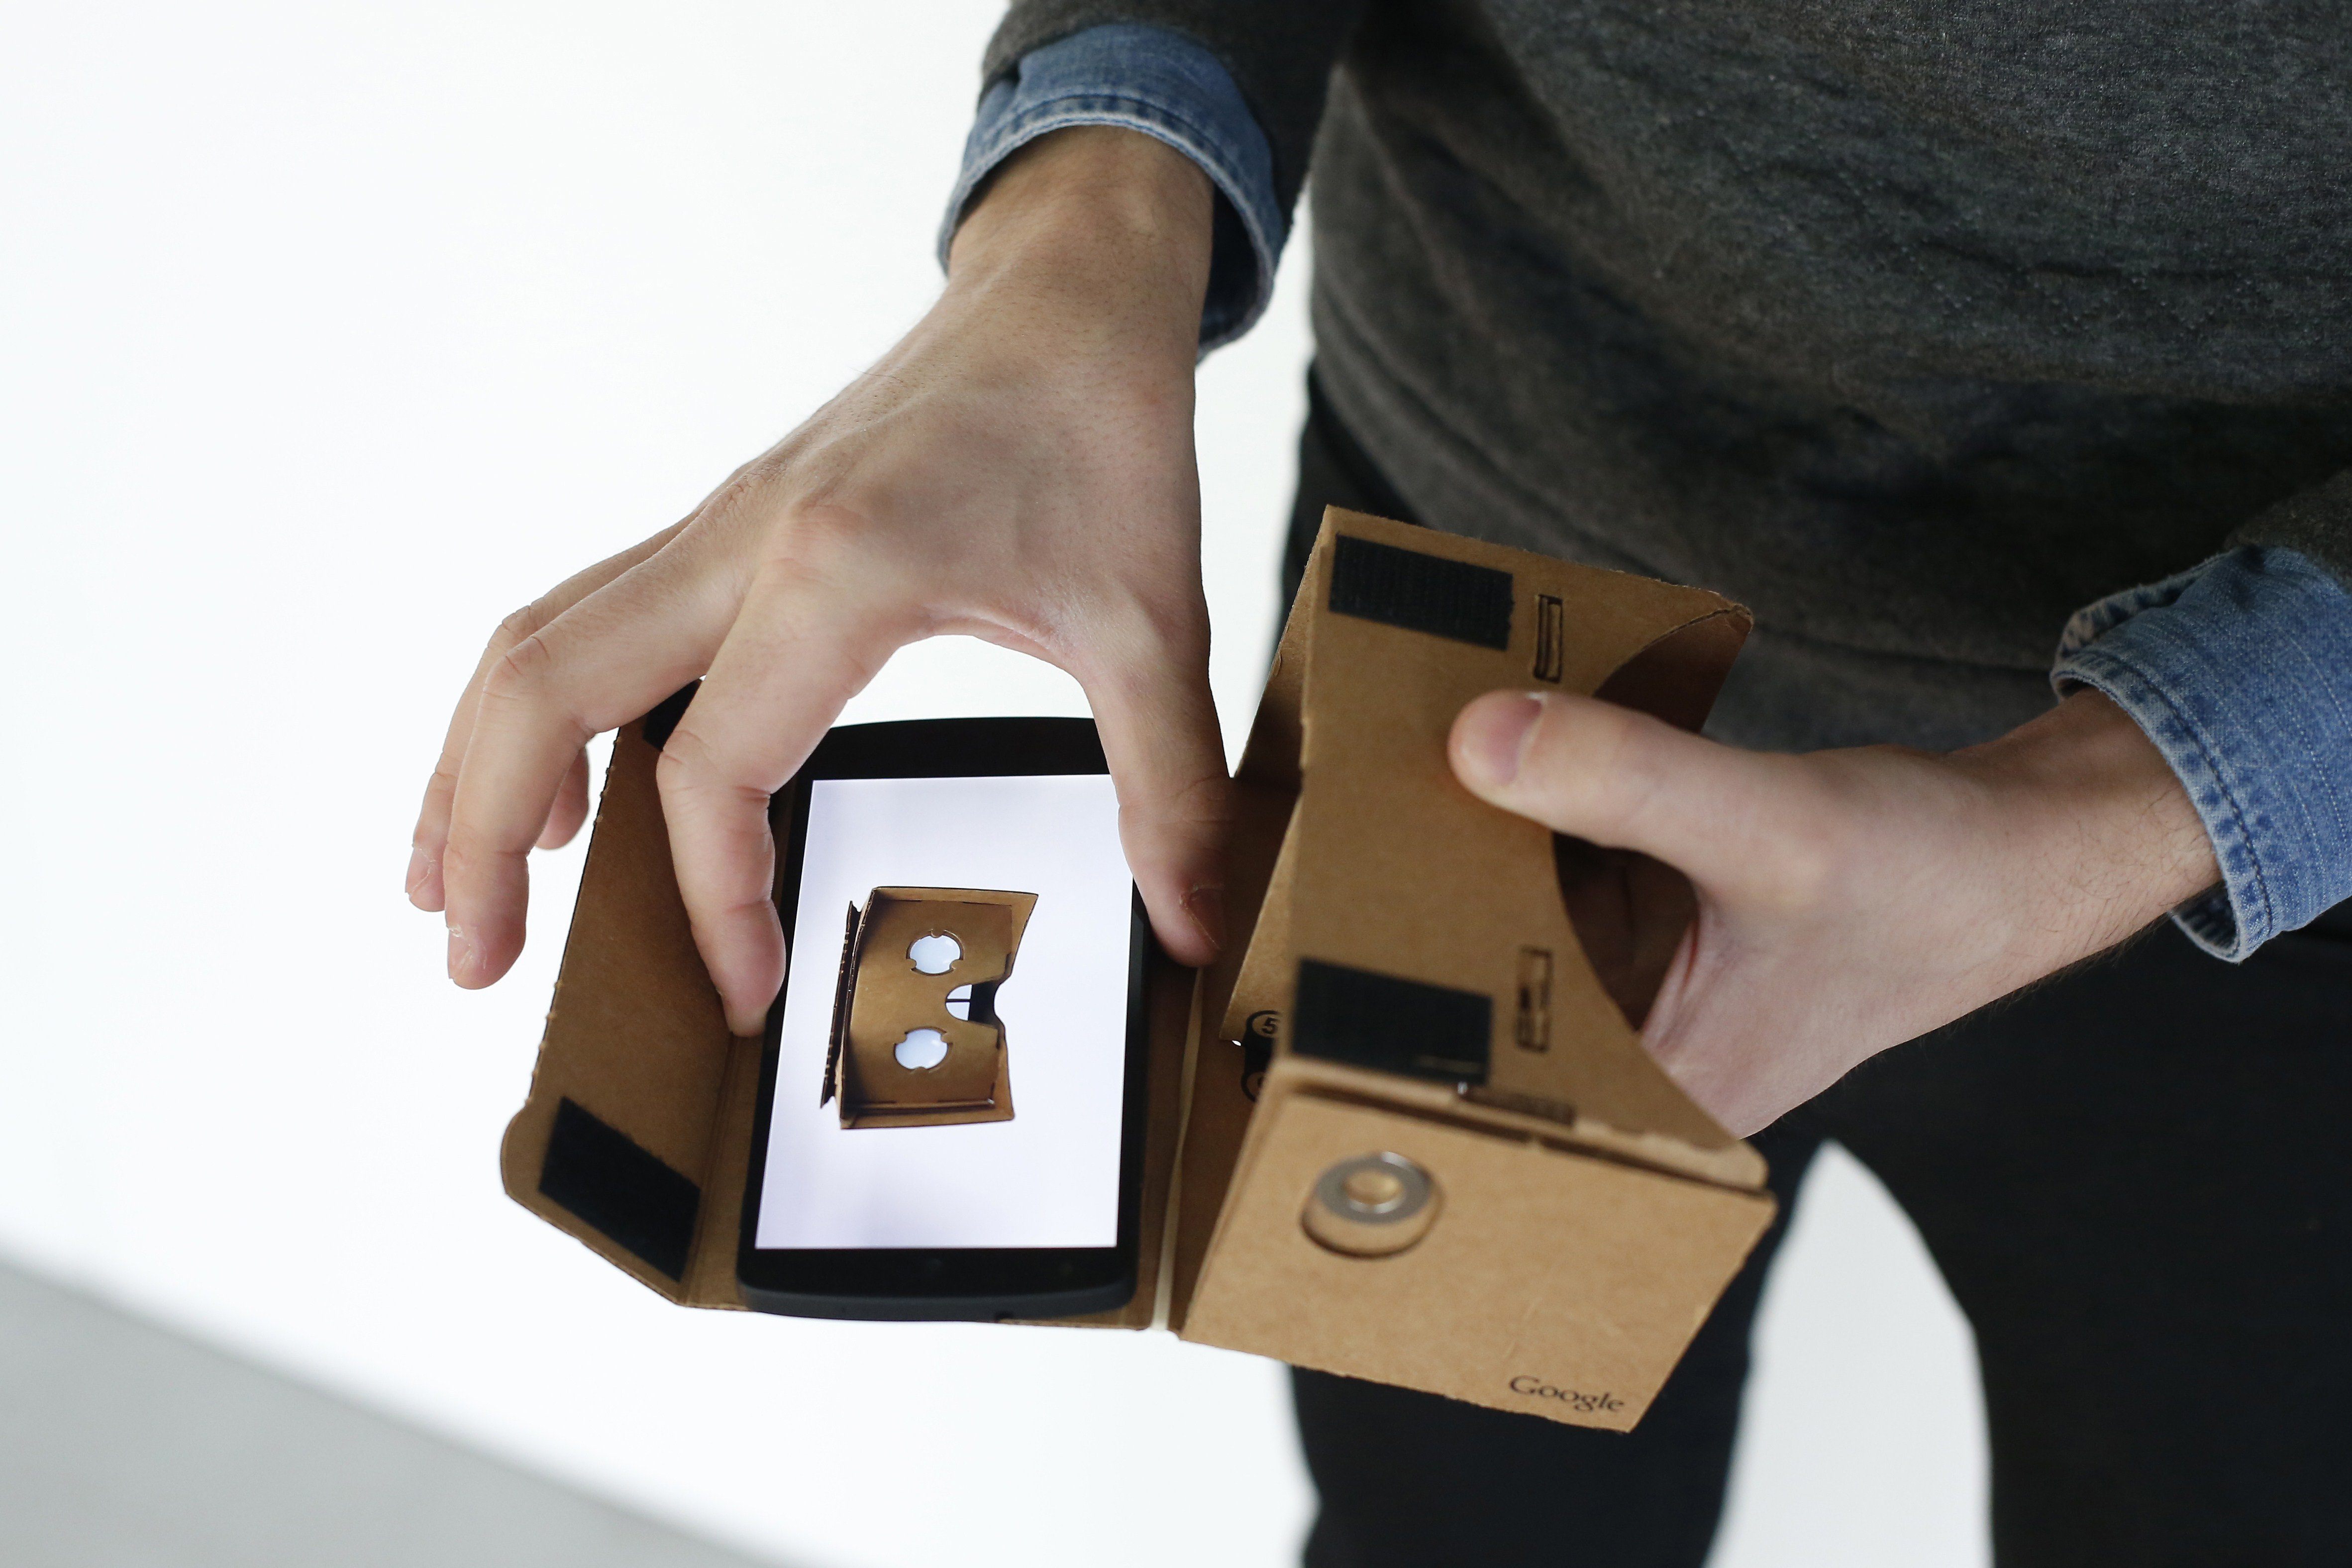 A Google employee presents a Google Cardboard virtual reality headset for android smartphones during a Google promotion event at the City of Fashion and Design (Cite de la mode et du design) in Paris on November 4, 2014. (Thomas Samson&mdash;AFP/Getty Images)